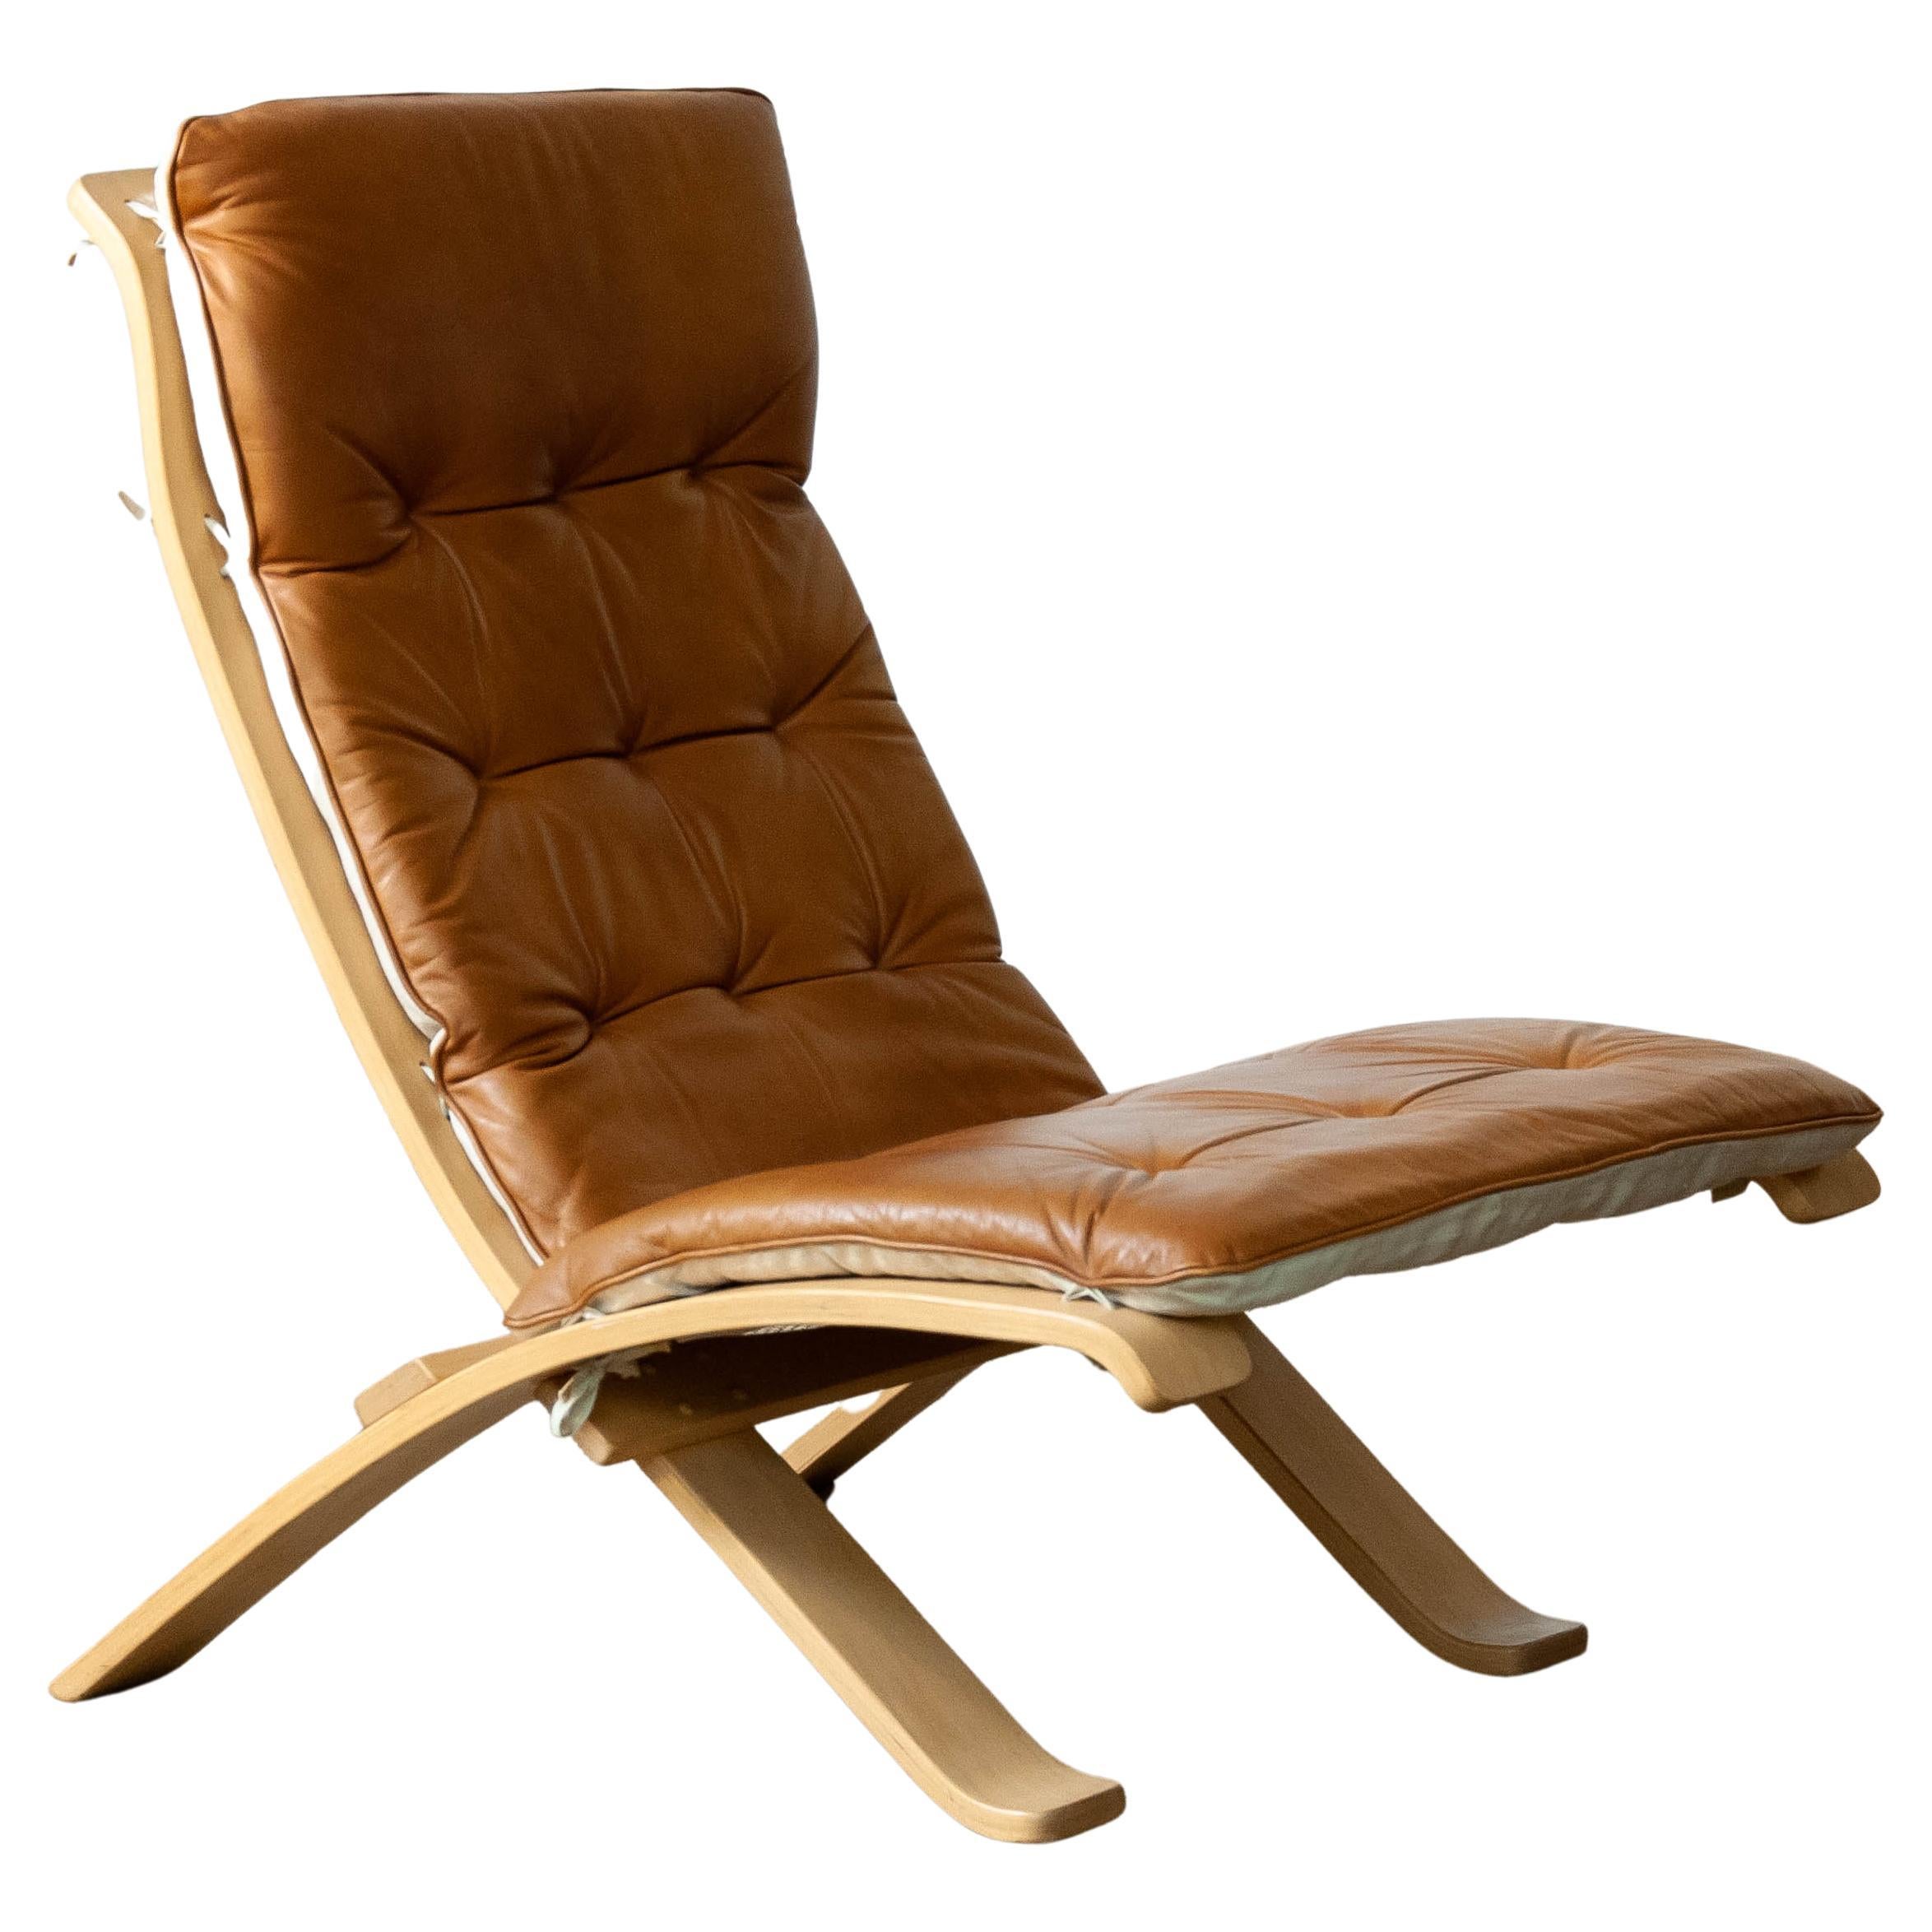 1970's Beech Bentwood with Cognac Leather Folding Lounge Chair by Nelo, Sweden For Sale